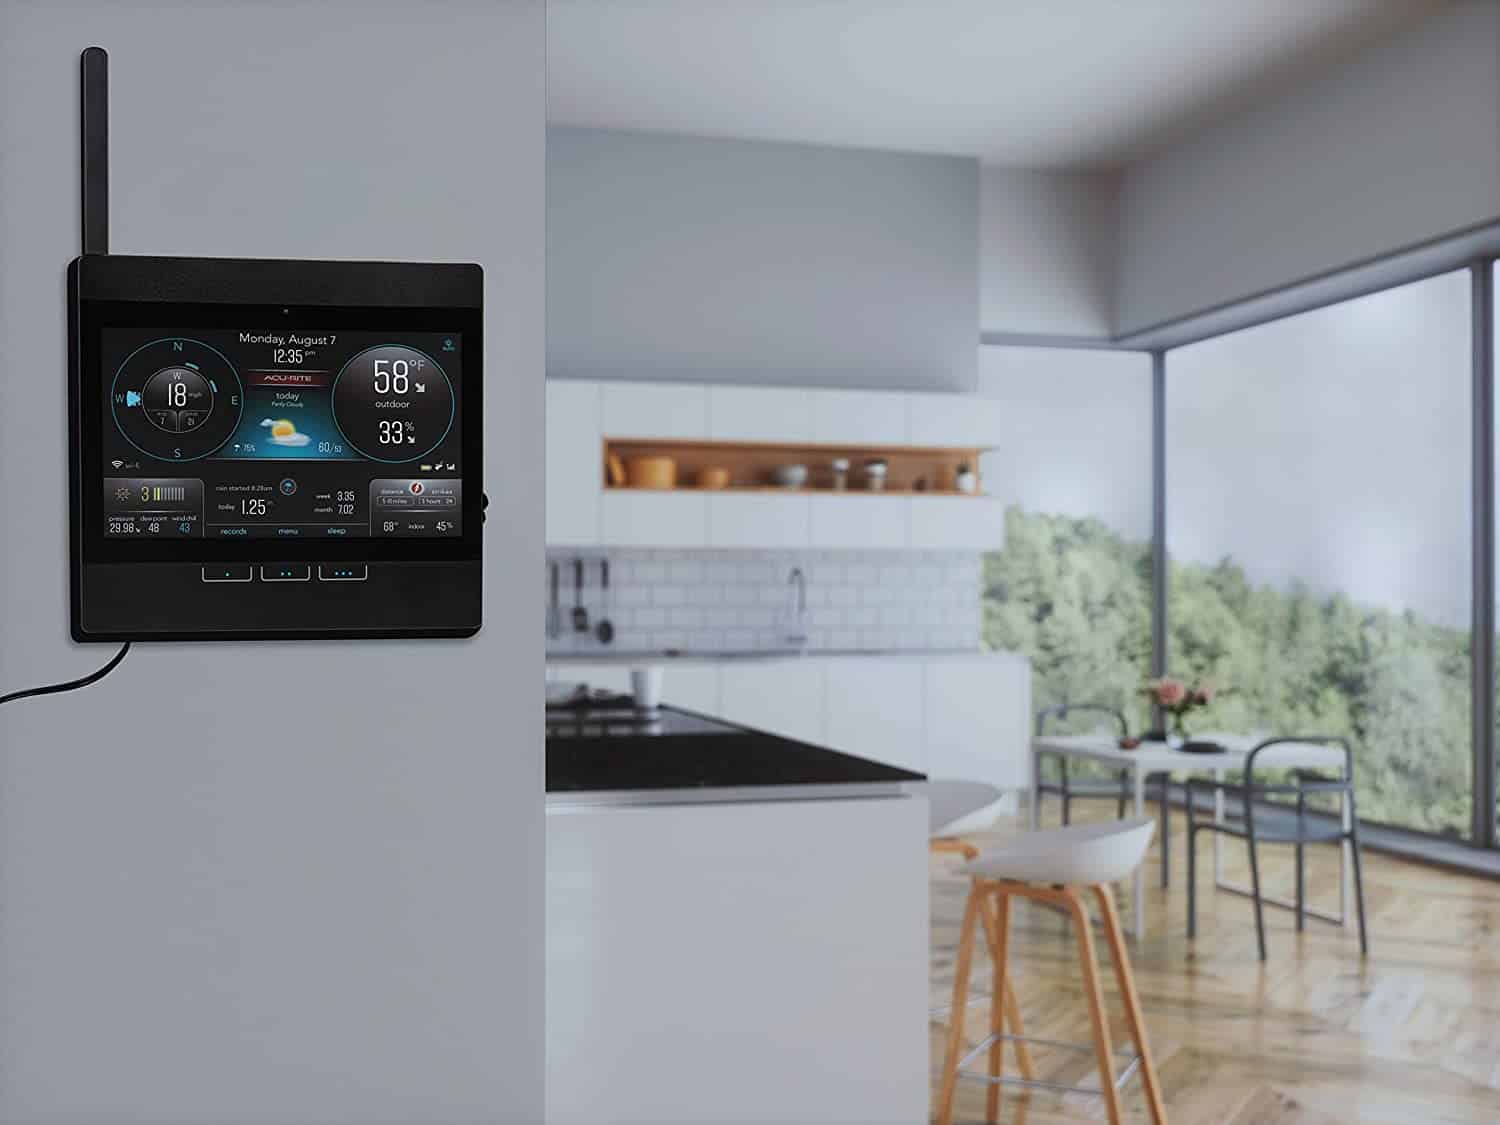 an acurite home weather station monitor mounted on a kitchen wall